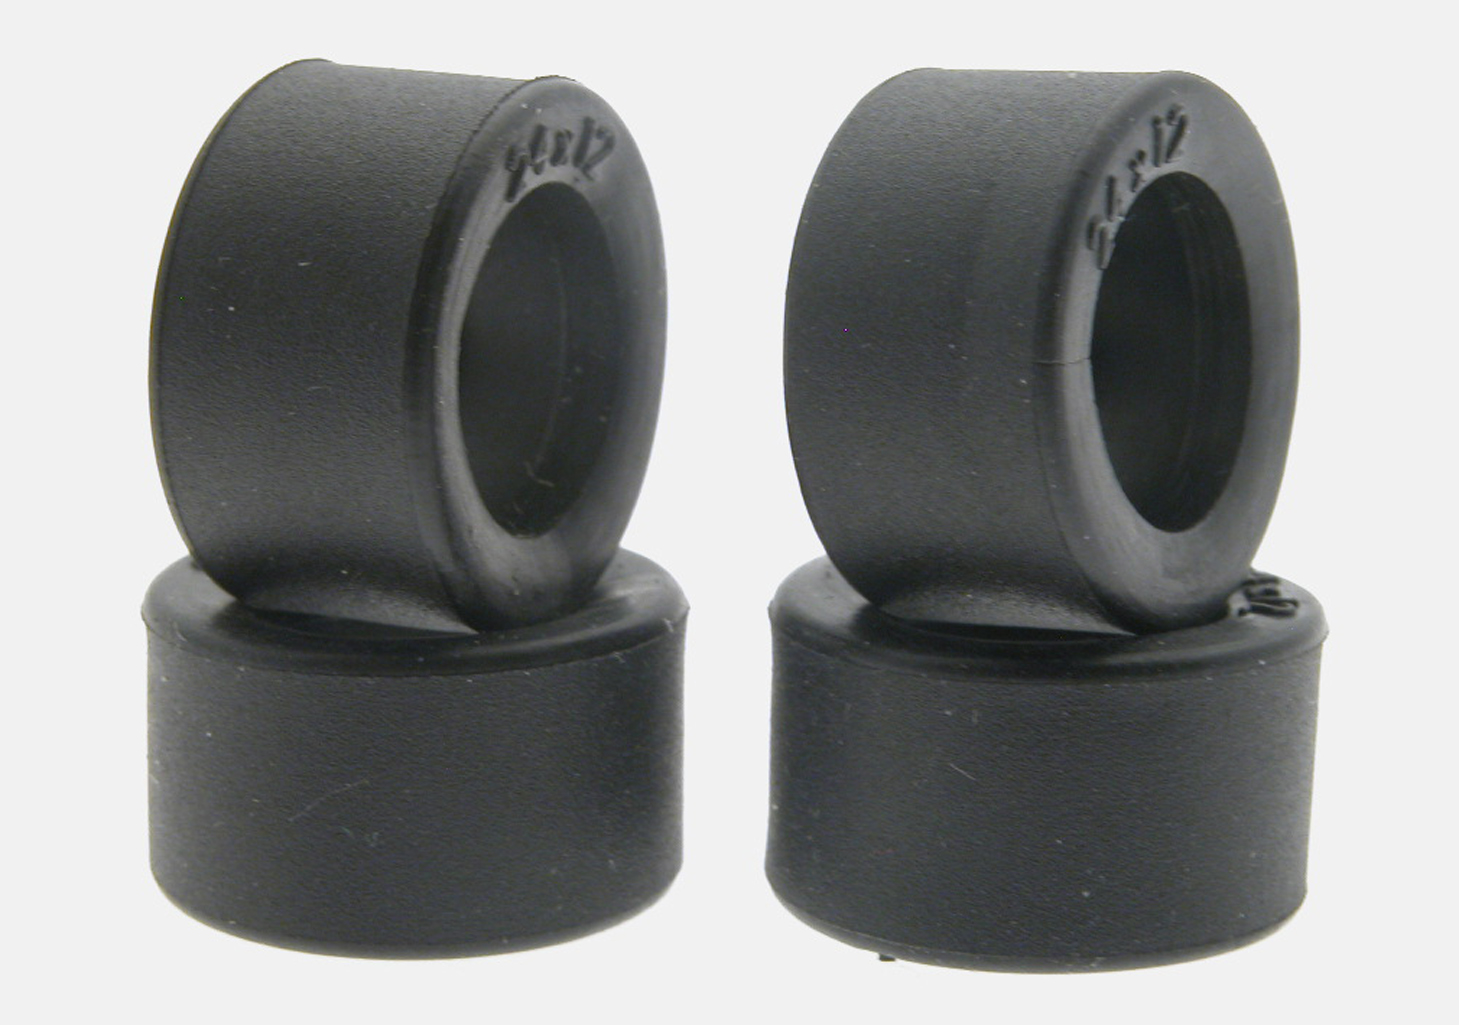 SC-4732 "RT" Racing Rubber tires for Profile hubs